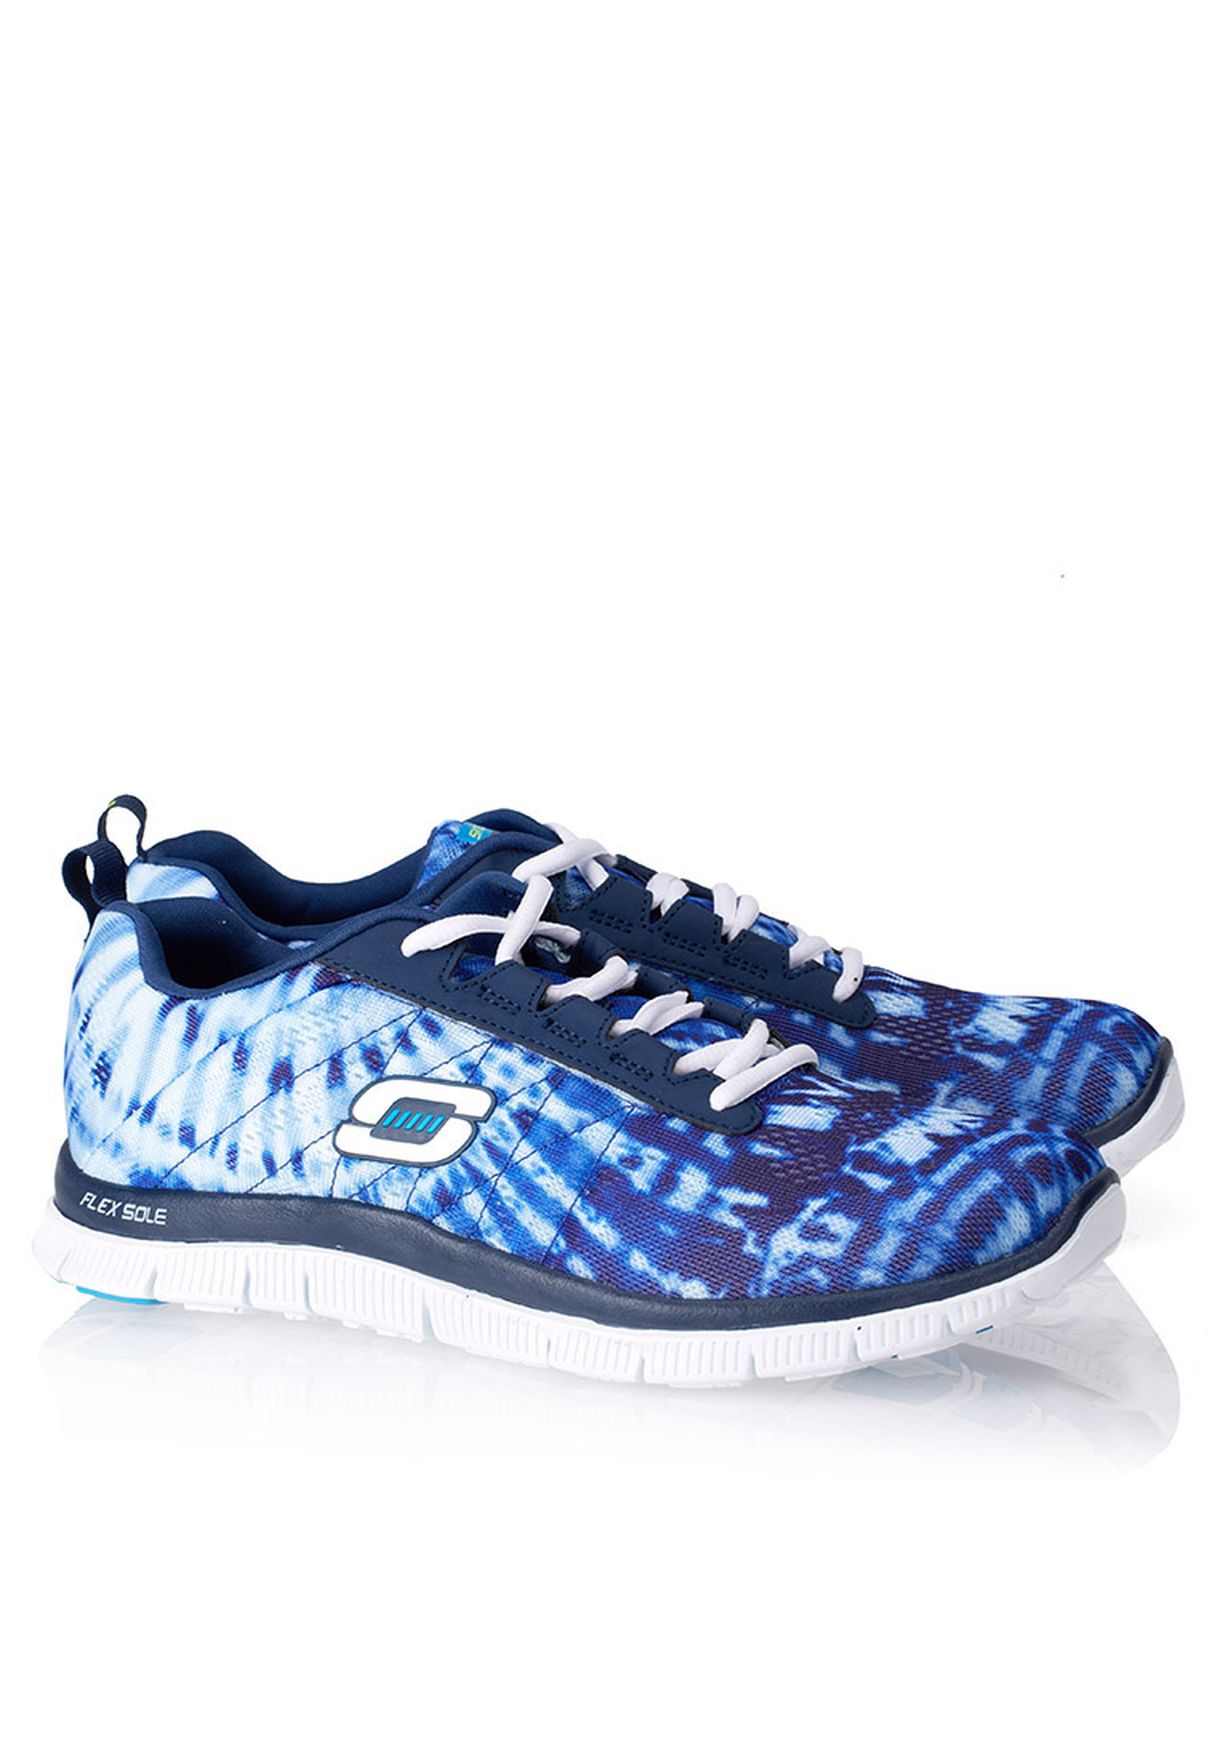 skechers appeal limited edition